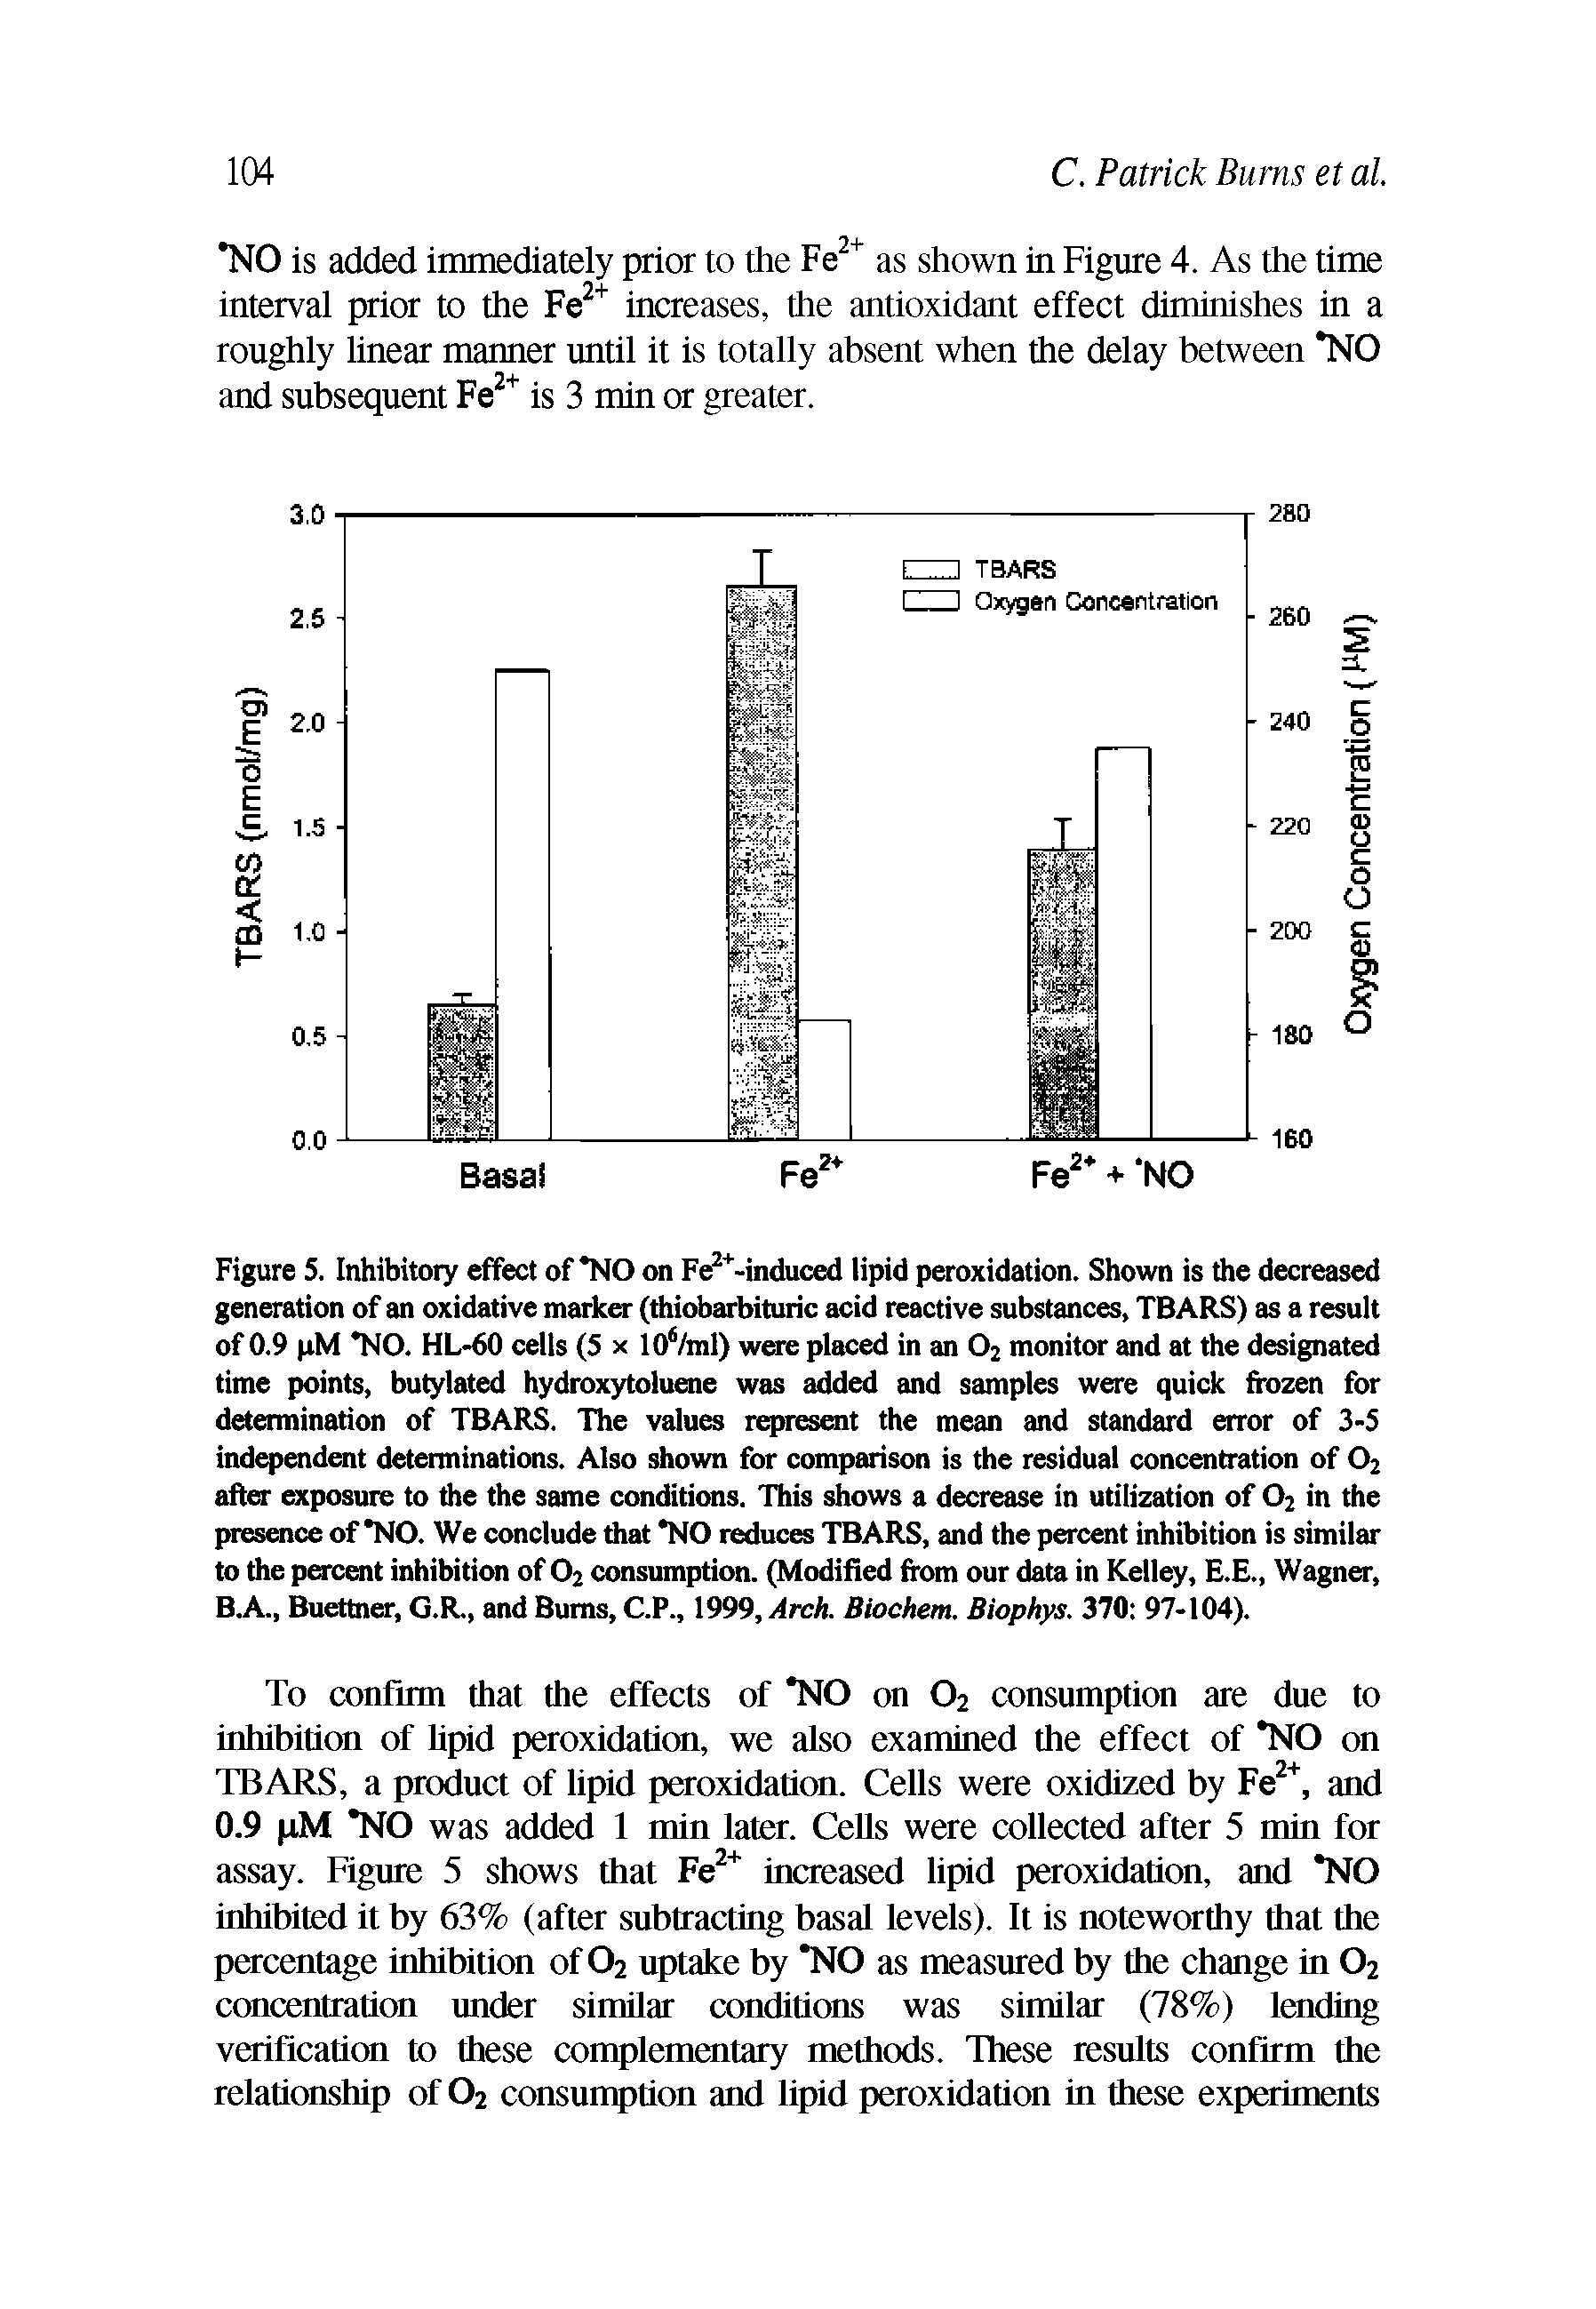 Figure 5. Inhibitory effect of NO on Fe -induced lipid peroxidation. Shown is the decreased generation of an oxidative marker (thiobarbituric acid reactive substances, TBARS) as a result of 0.9 iM NO. HL-60 cells (5 x loVral) were placed in an O2 monitor and at the designated time points, butylated hydroxytoluene was added and samples were quick frozen for determination of TBARS. The values represent the mean and standard error of 3-5 independent determinations. Also shown for comparison is the residual concentration of O2 after exposure to the the same conditions. This shows a decrease in utilization of O2 in the presence of NO. We conclude that NO reduces TBARS, and the percent inhibition is similar to the poeent inhibition of O2 consumption. (Modified from our data in Kelley, E.E., Wagner, B.A., Buettner, G.R., and Bums, C.P., 1999, Arch. Biochem. Biophys. 370 97-104).